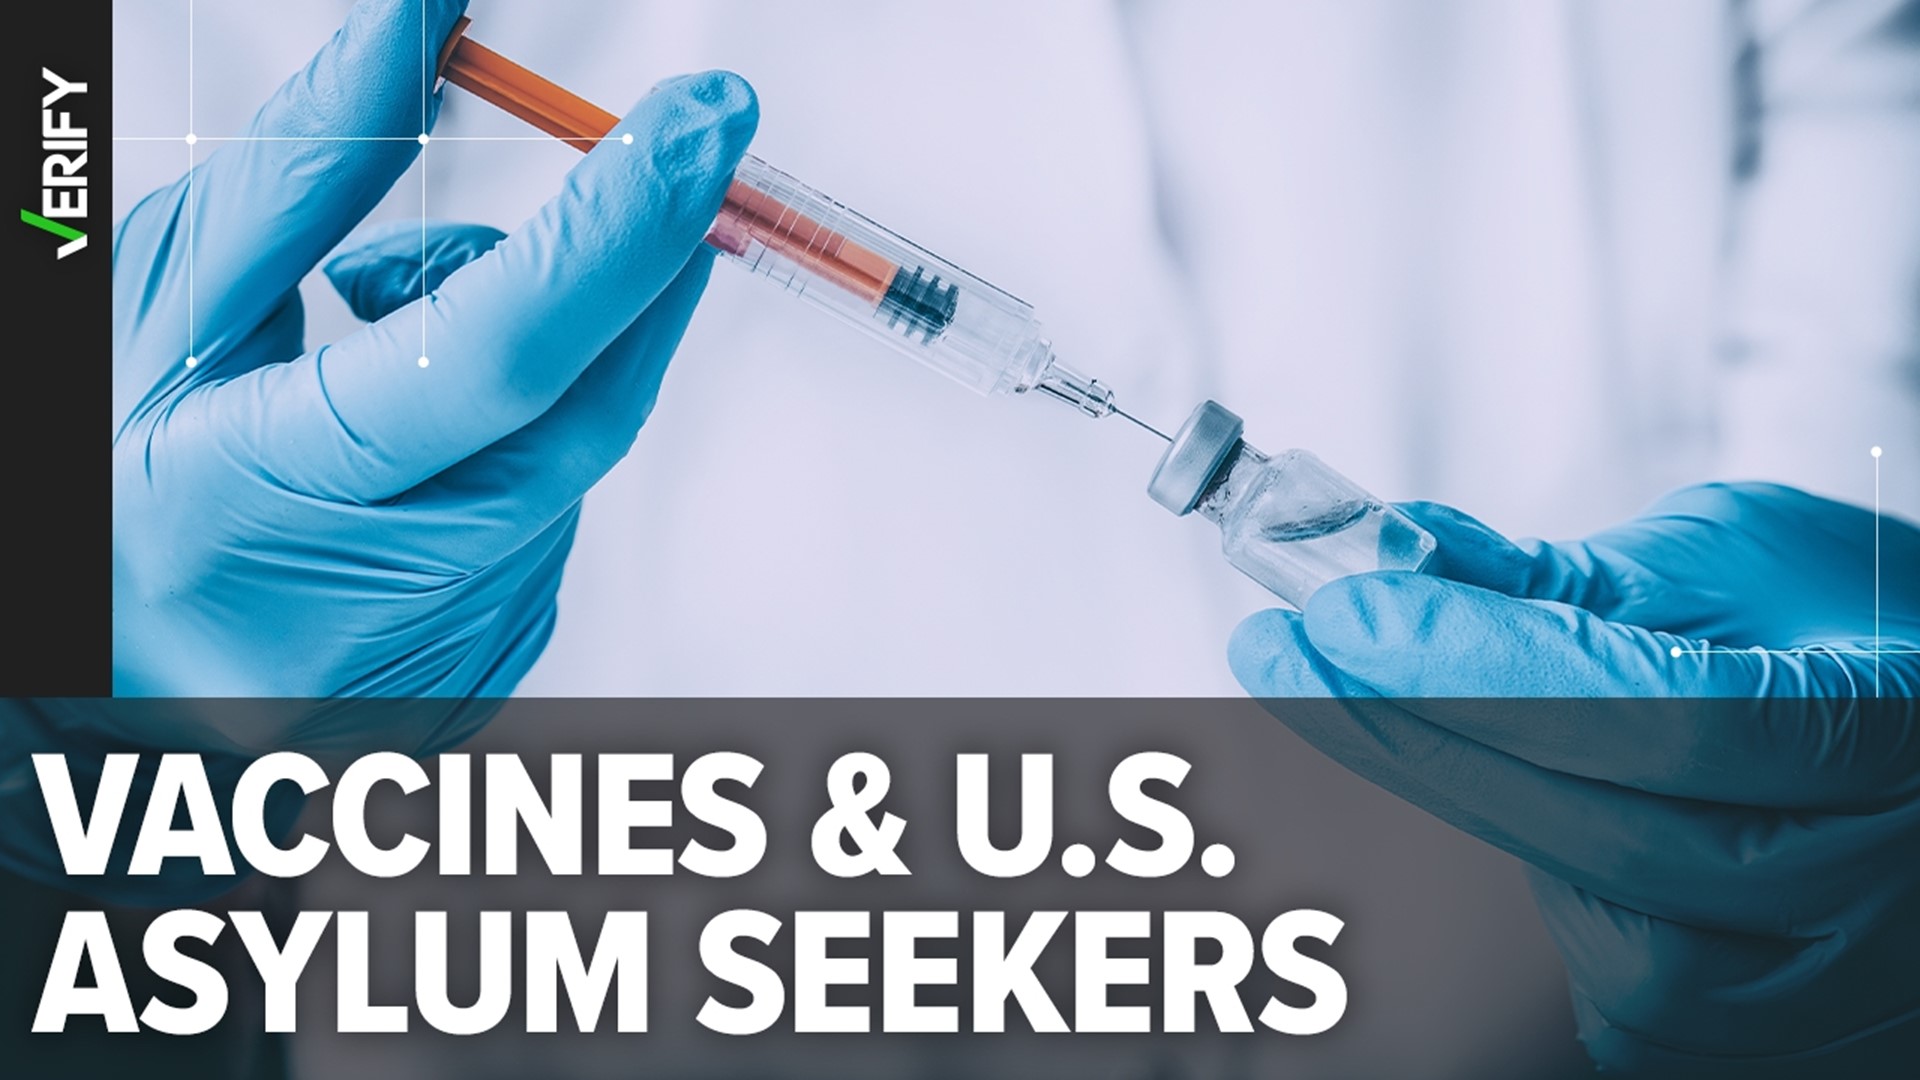 People seeking asylum in the United States are not required to receive routine vaccinations against diseases like polio, smallpox or chickenpox at the border.